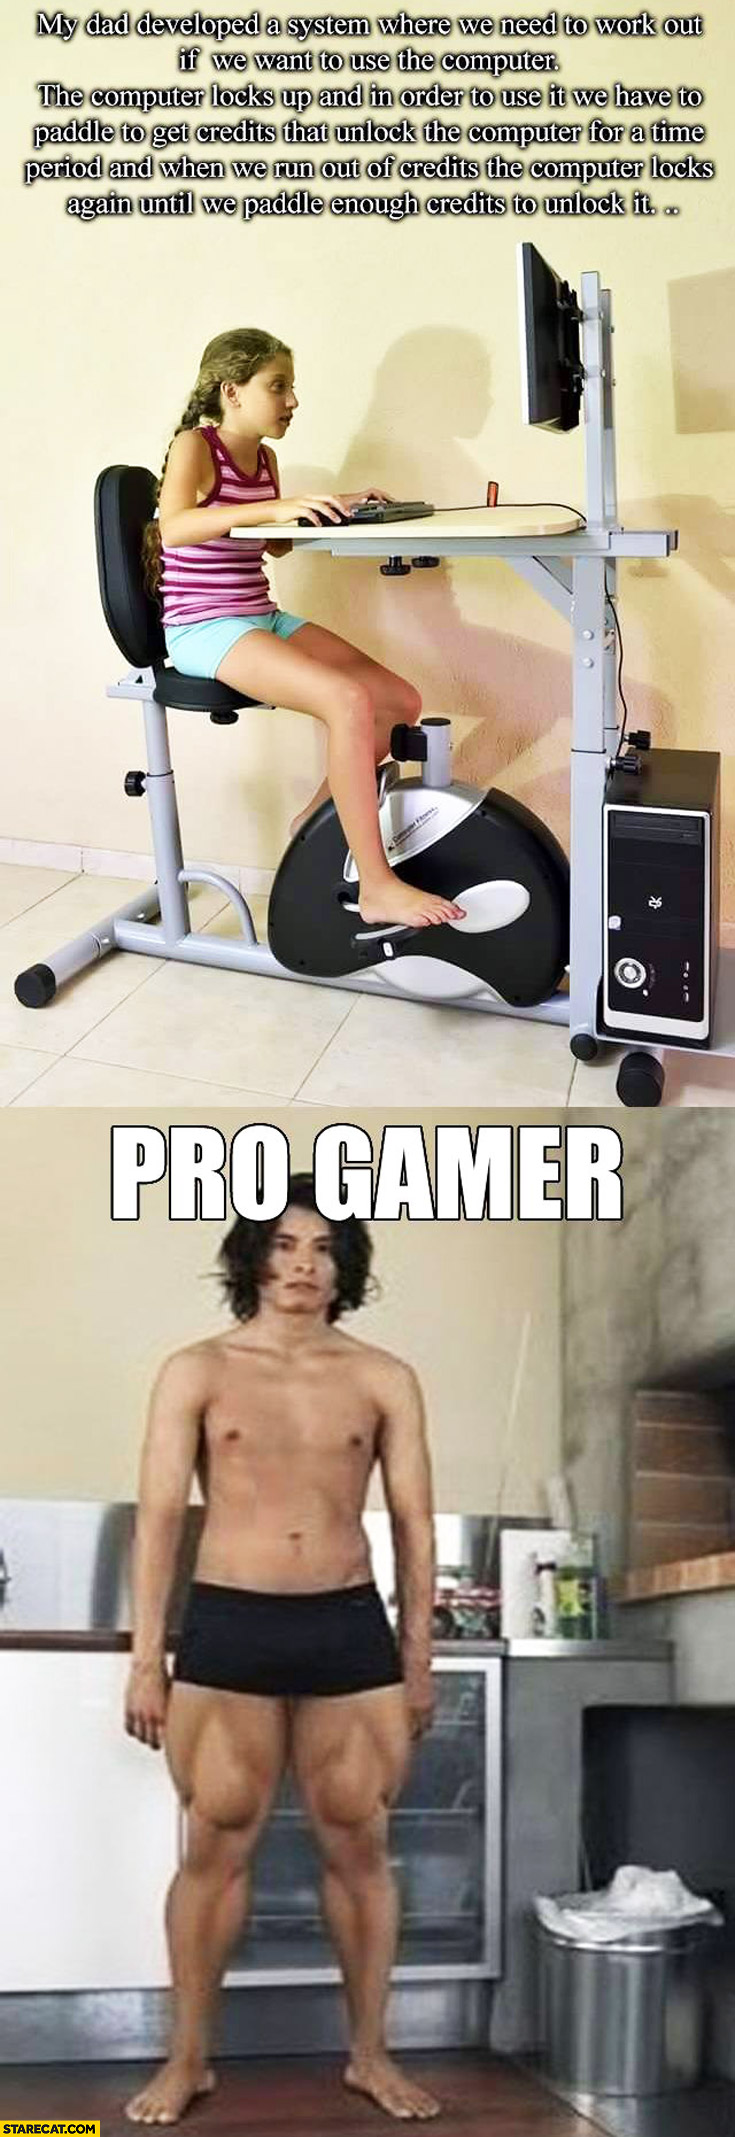 Cycle to unlock the computer pro gamer muscular legs